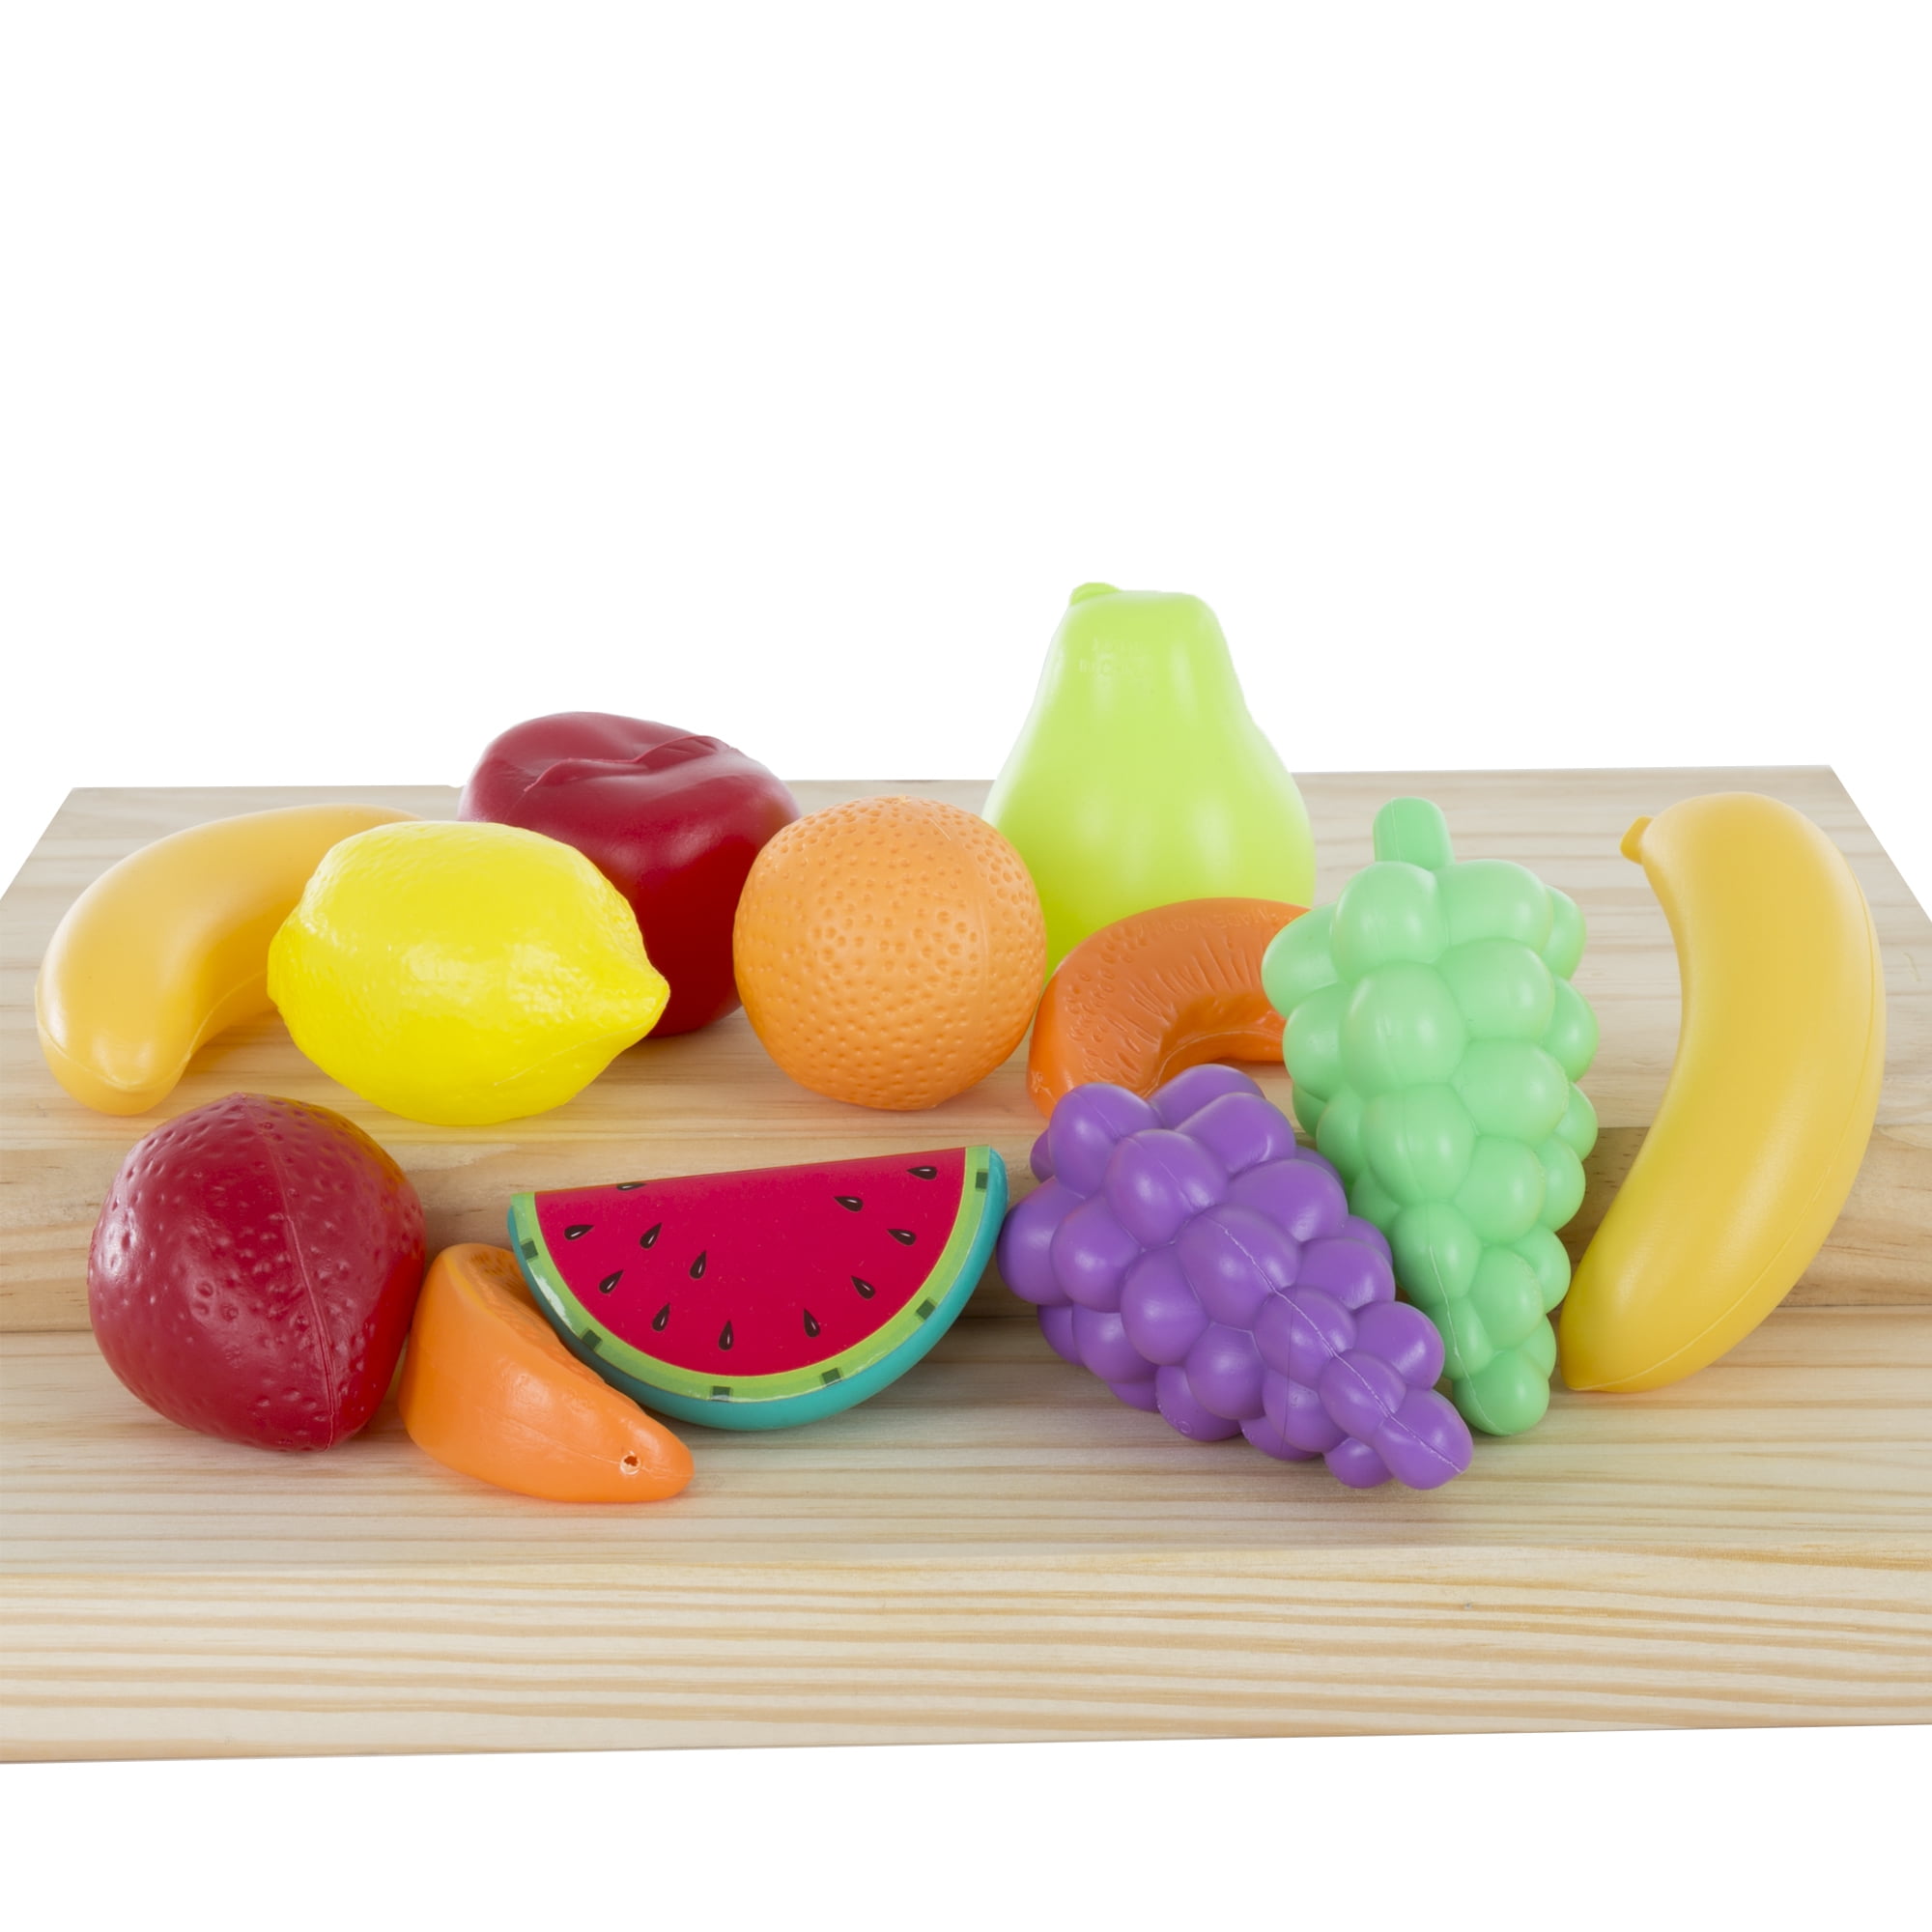 Details about   120-Piece Pretend Play Assorted Food Set Fresh Boxed Canned Food Fruit Vegetable 